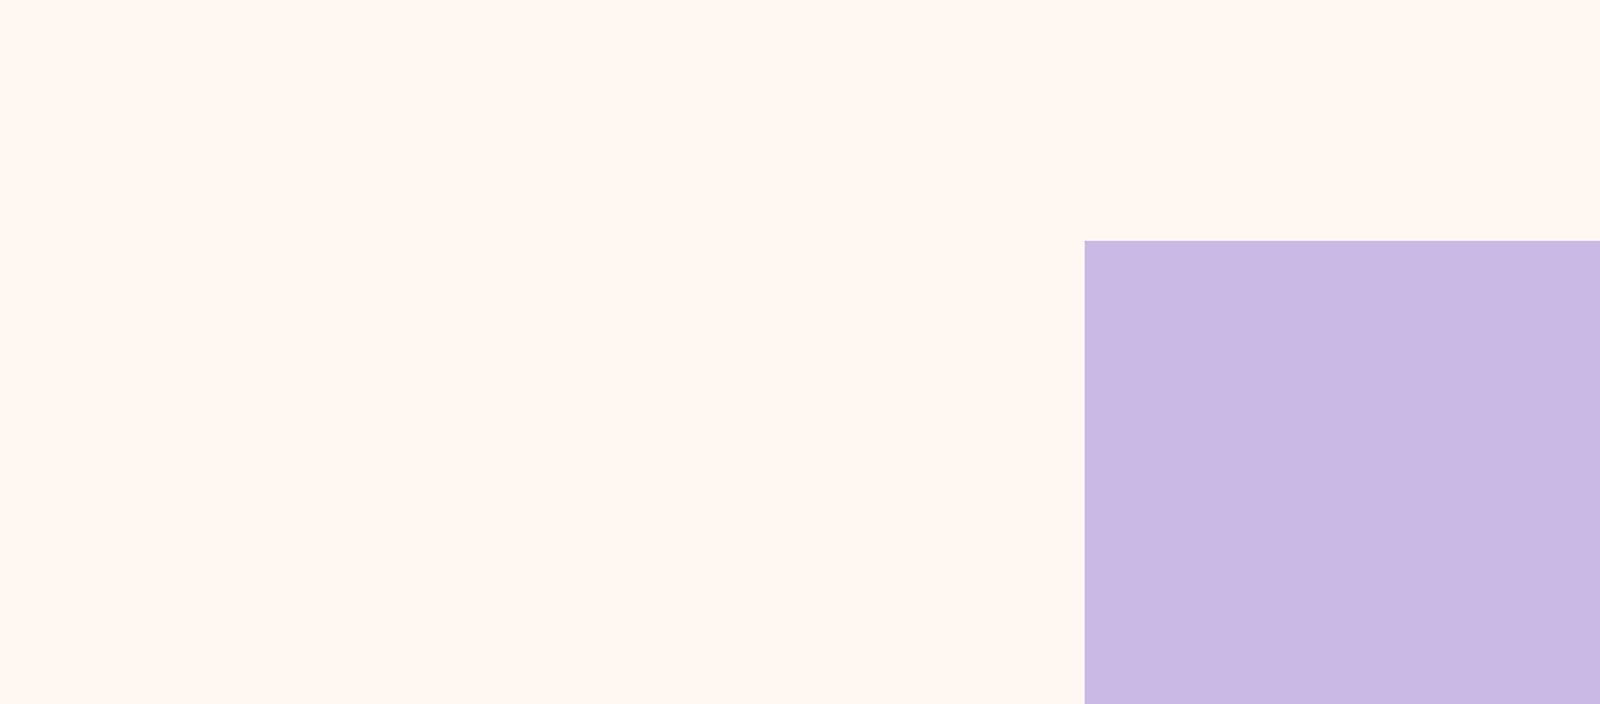 An image of a purple and white square.